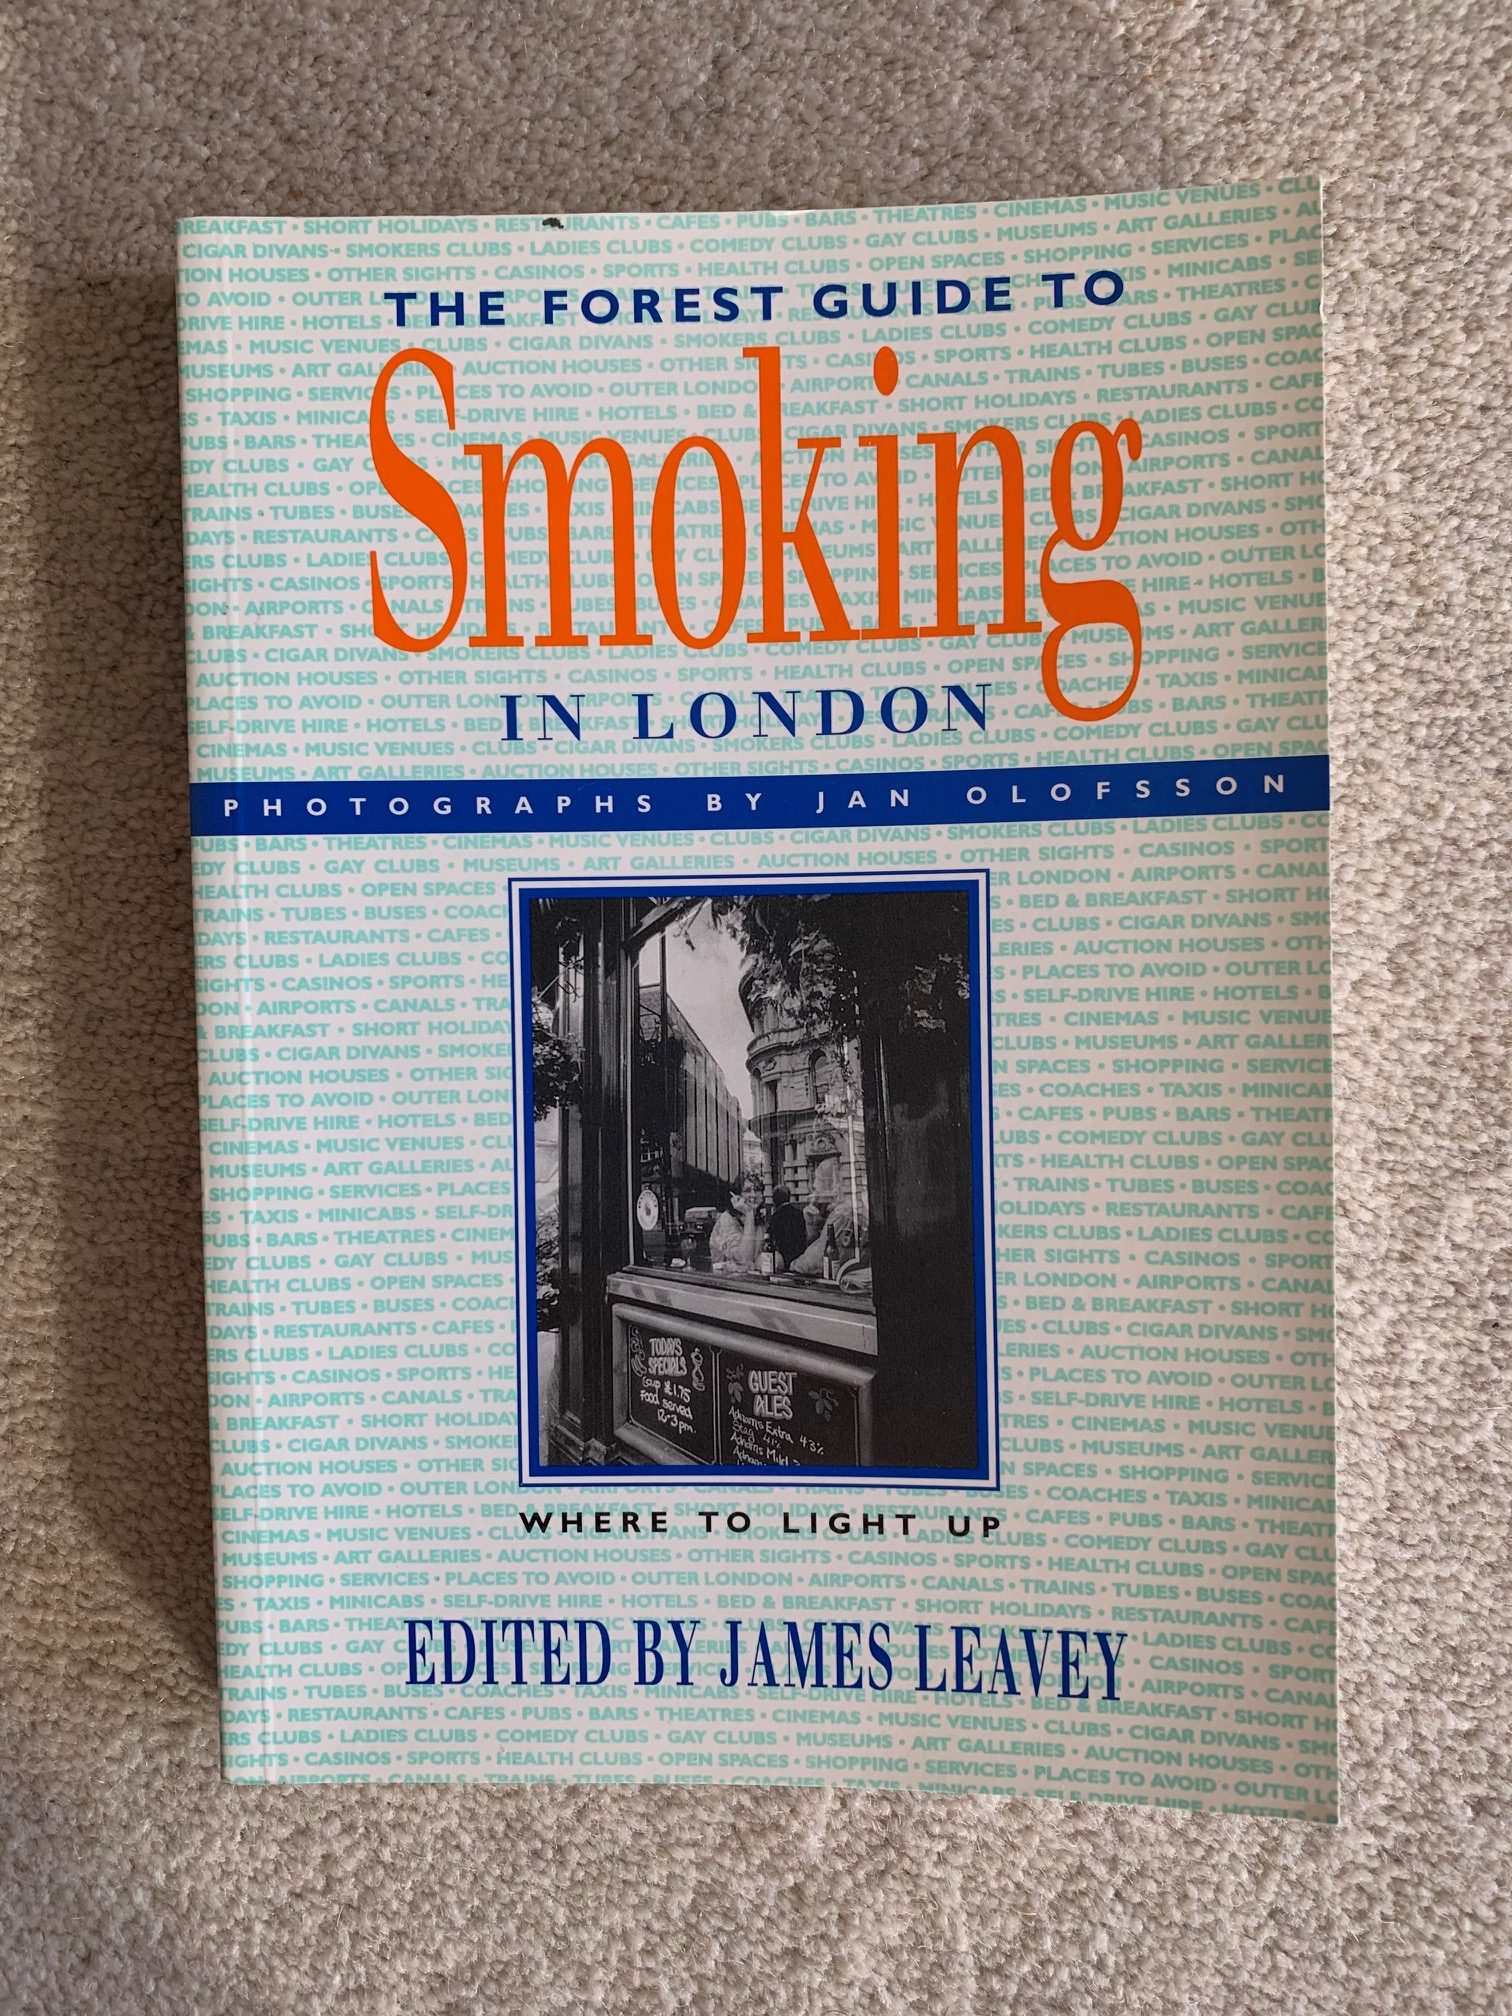 The Forest Guide to Smoking in London Image